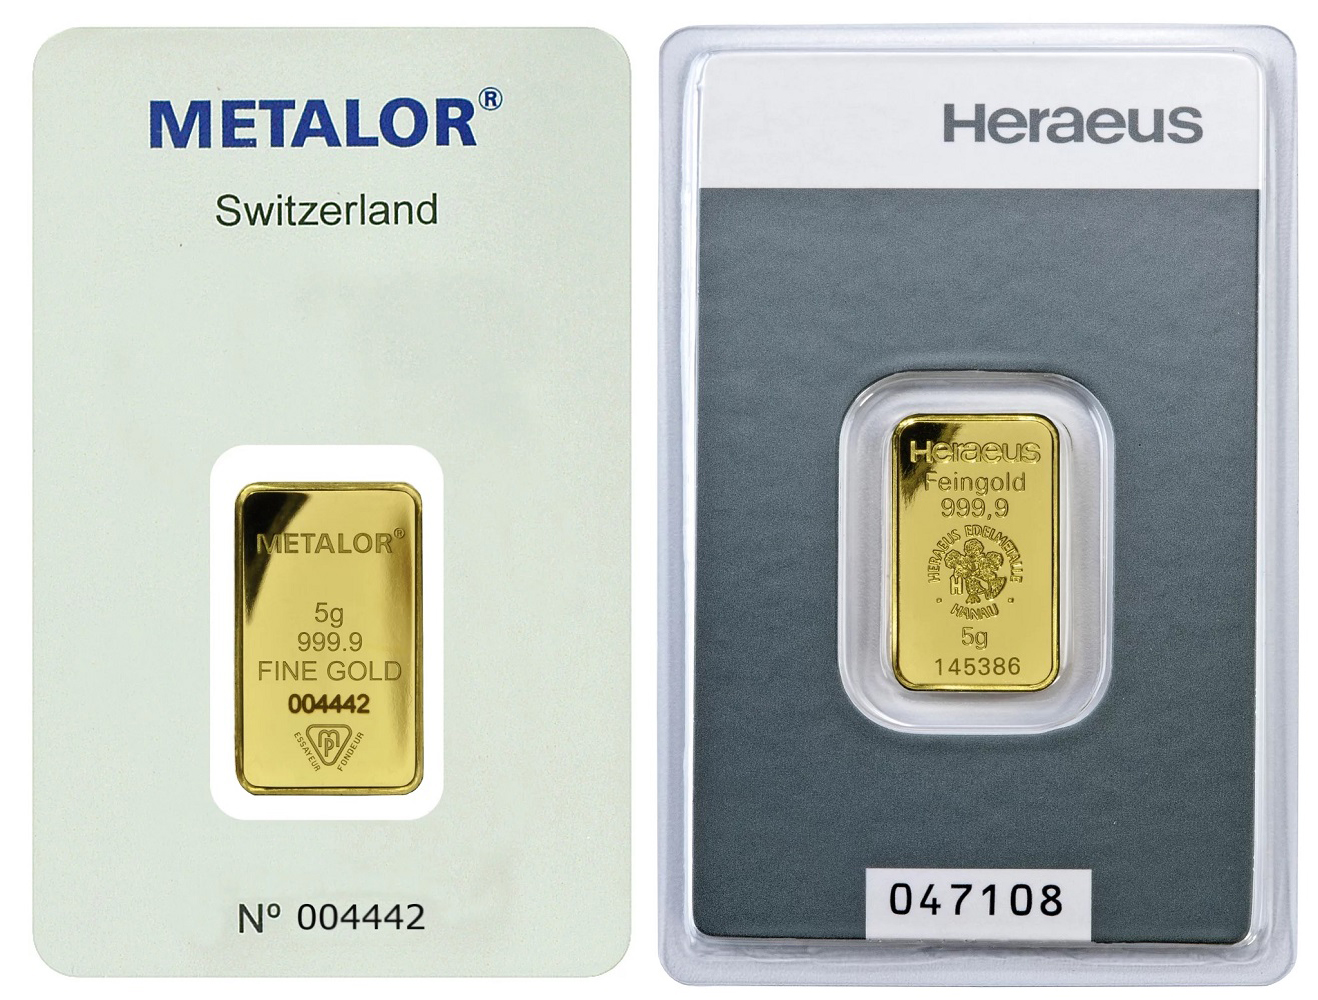 Sell 5g Gold Bars - Up to £201.12 - Sell 5g Gold Bars at Market Leading ...